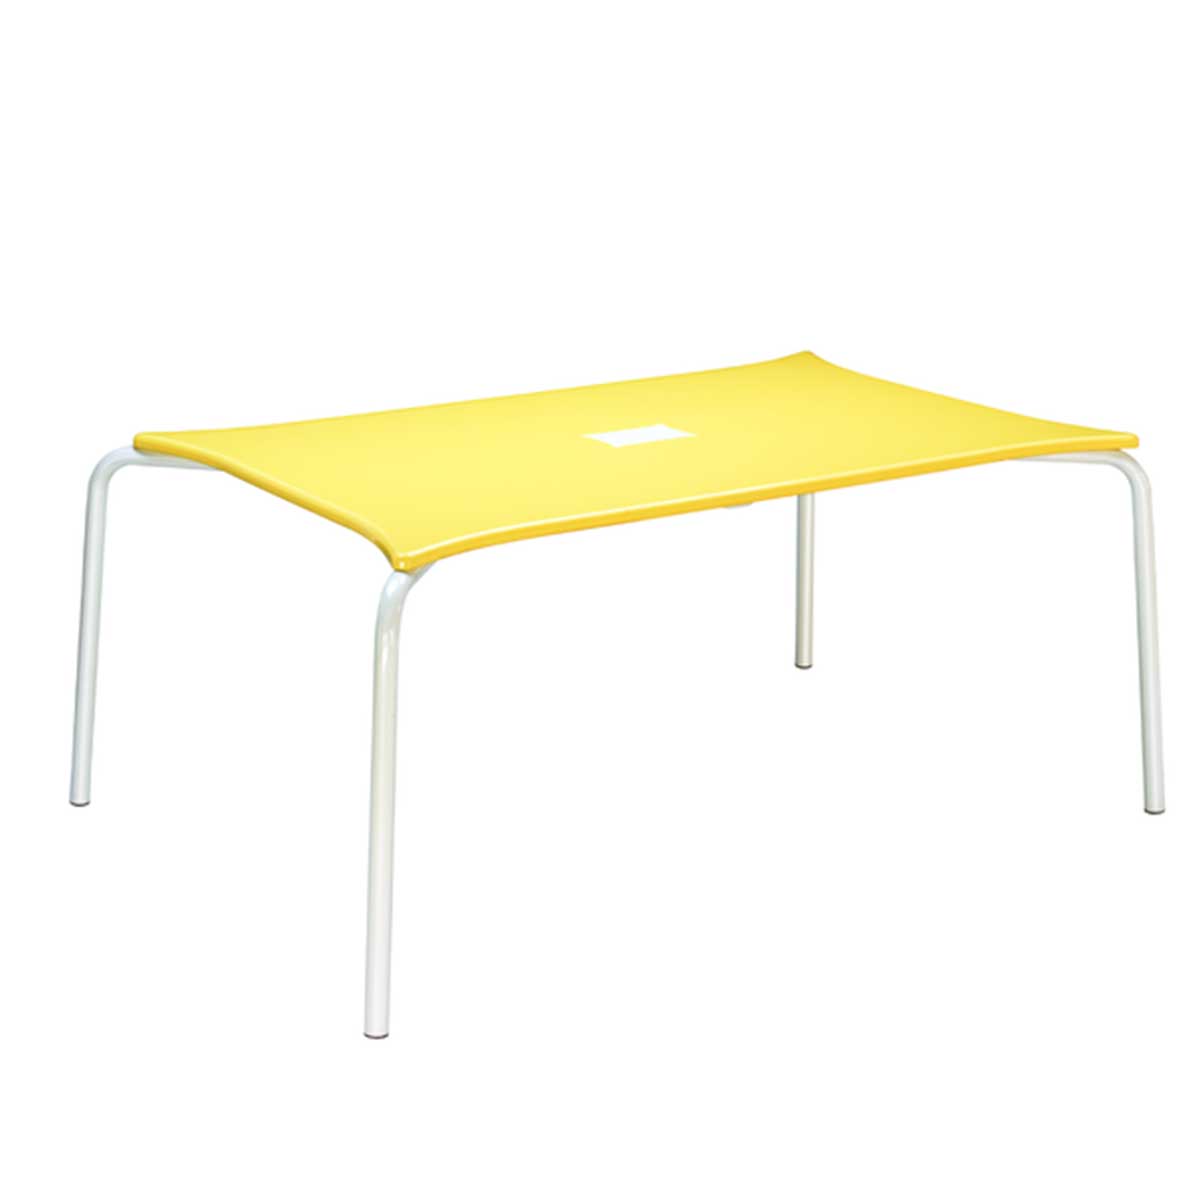 Cafeteria Table Manufacturers, Suppliers in Faridabad Sector 21a